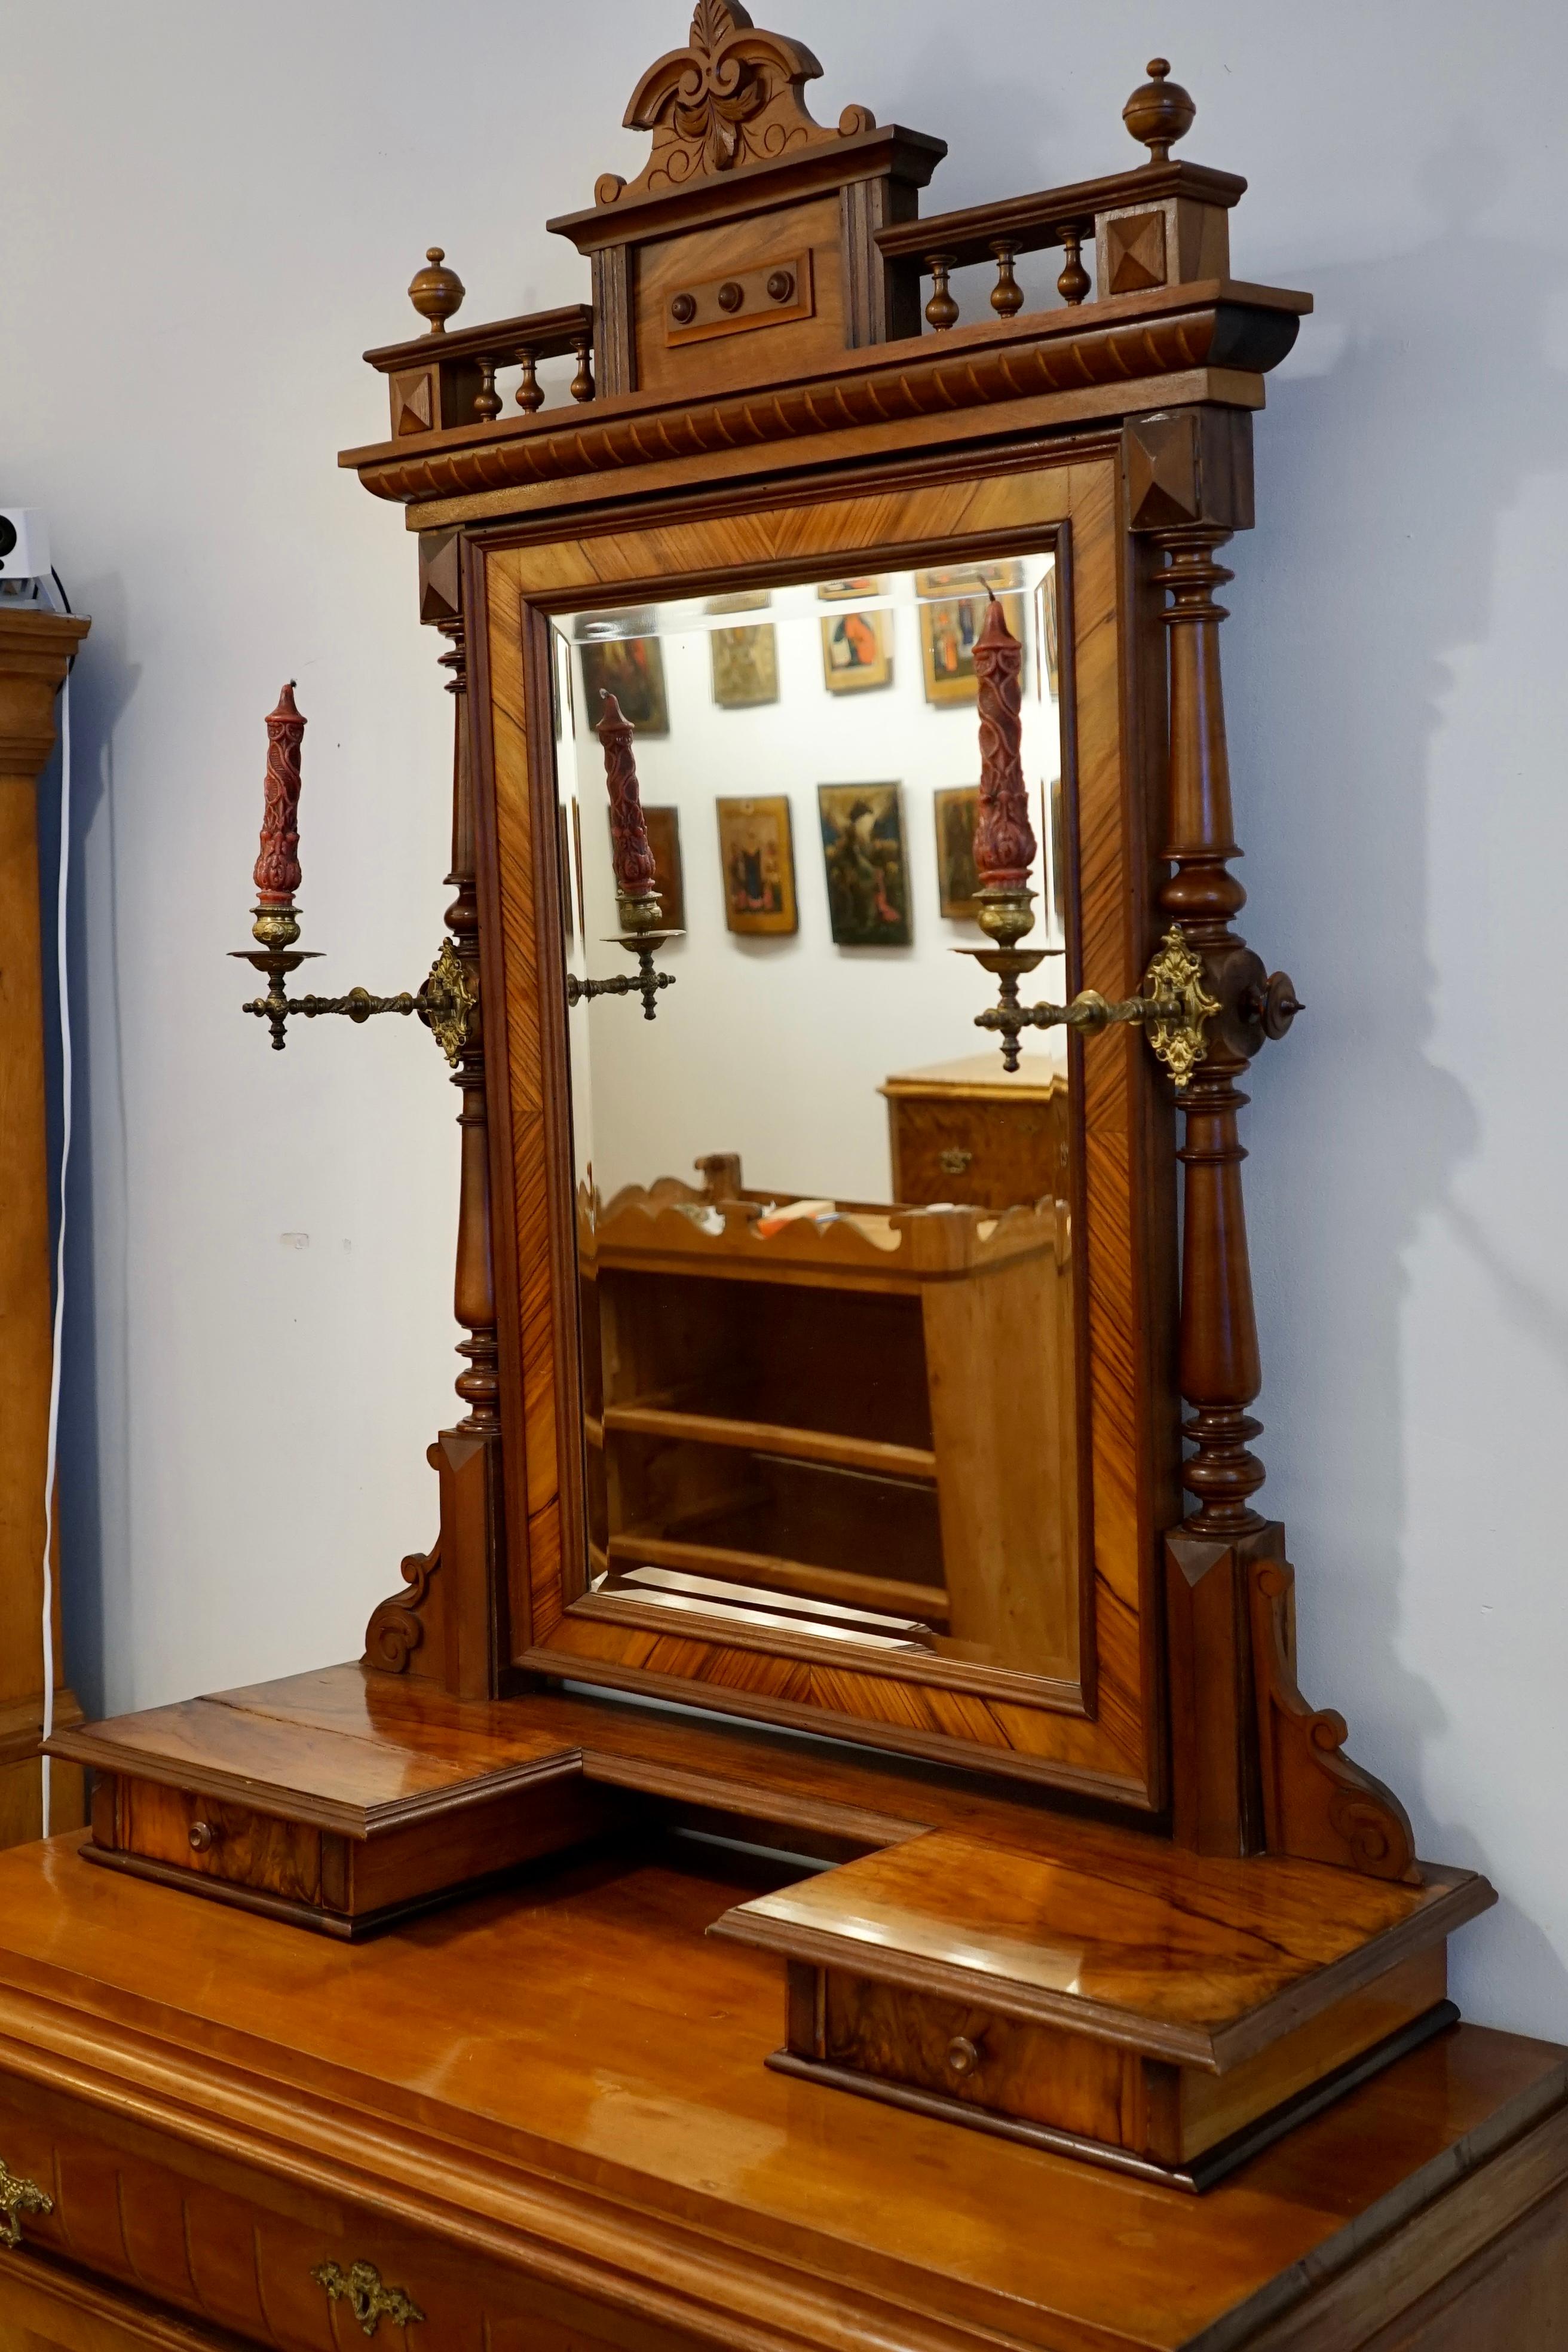 Combining the late 19th century forms of the Renaissance Revival period with spacious functionality. Constructed of fir and birch with mahogany inlays on all facing surfaces. This dresser has been fully refinished. All drawers, locks and keys are in